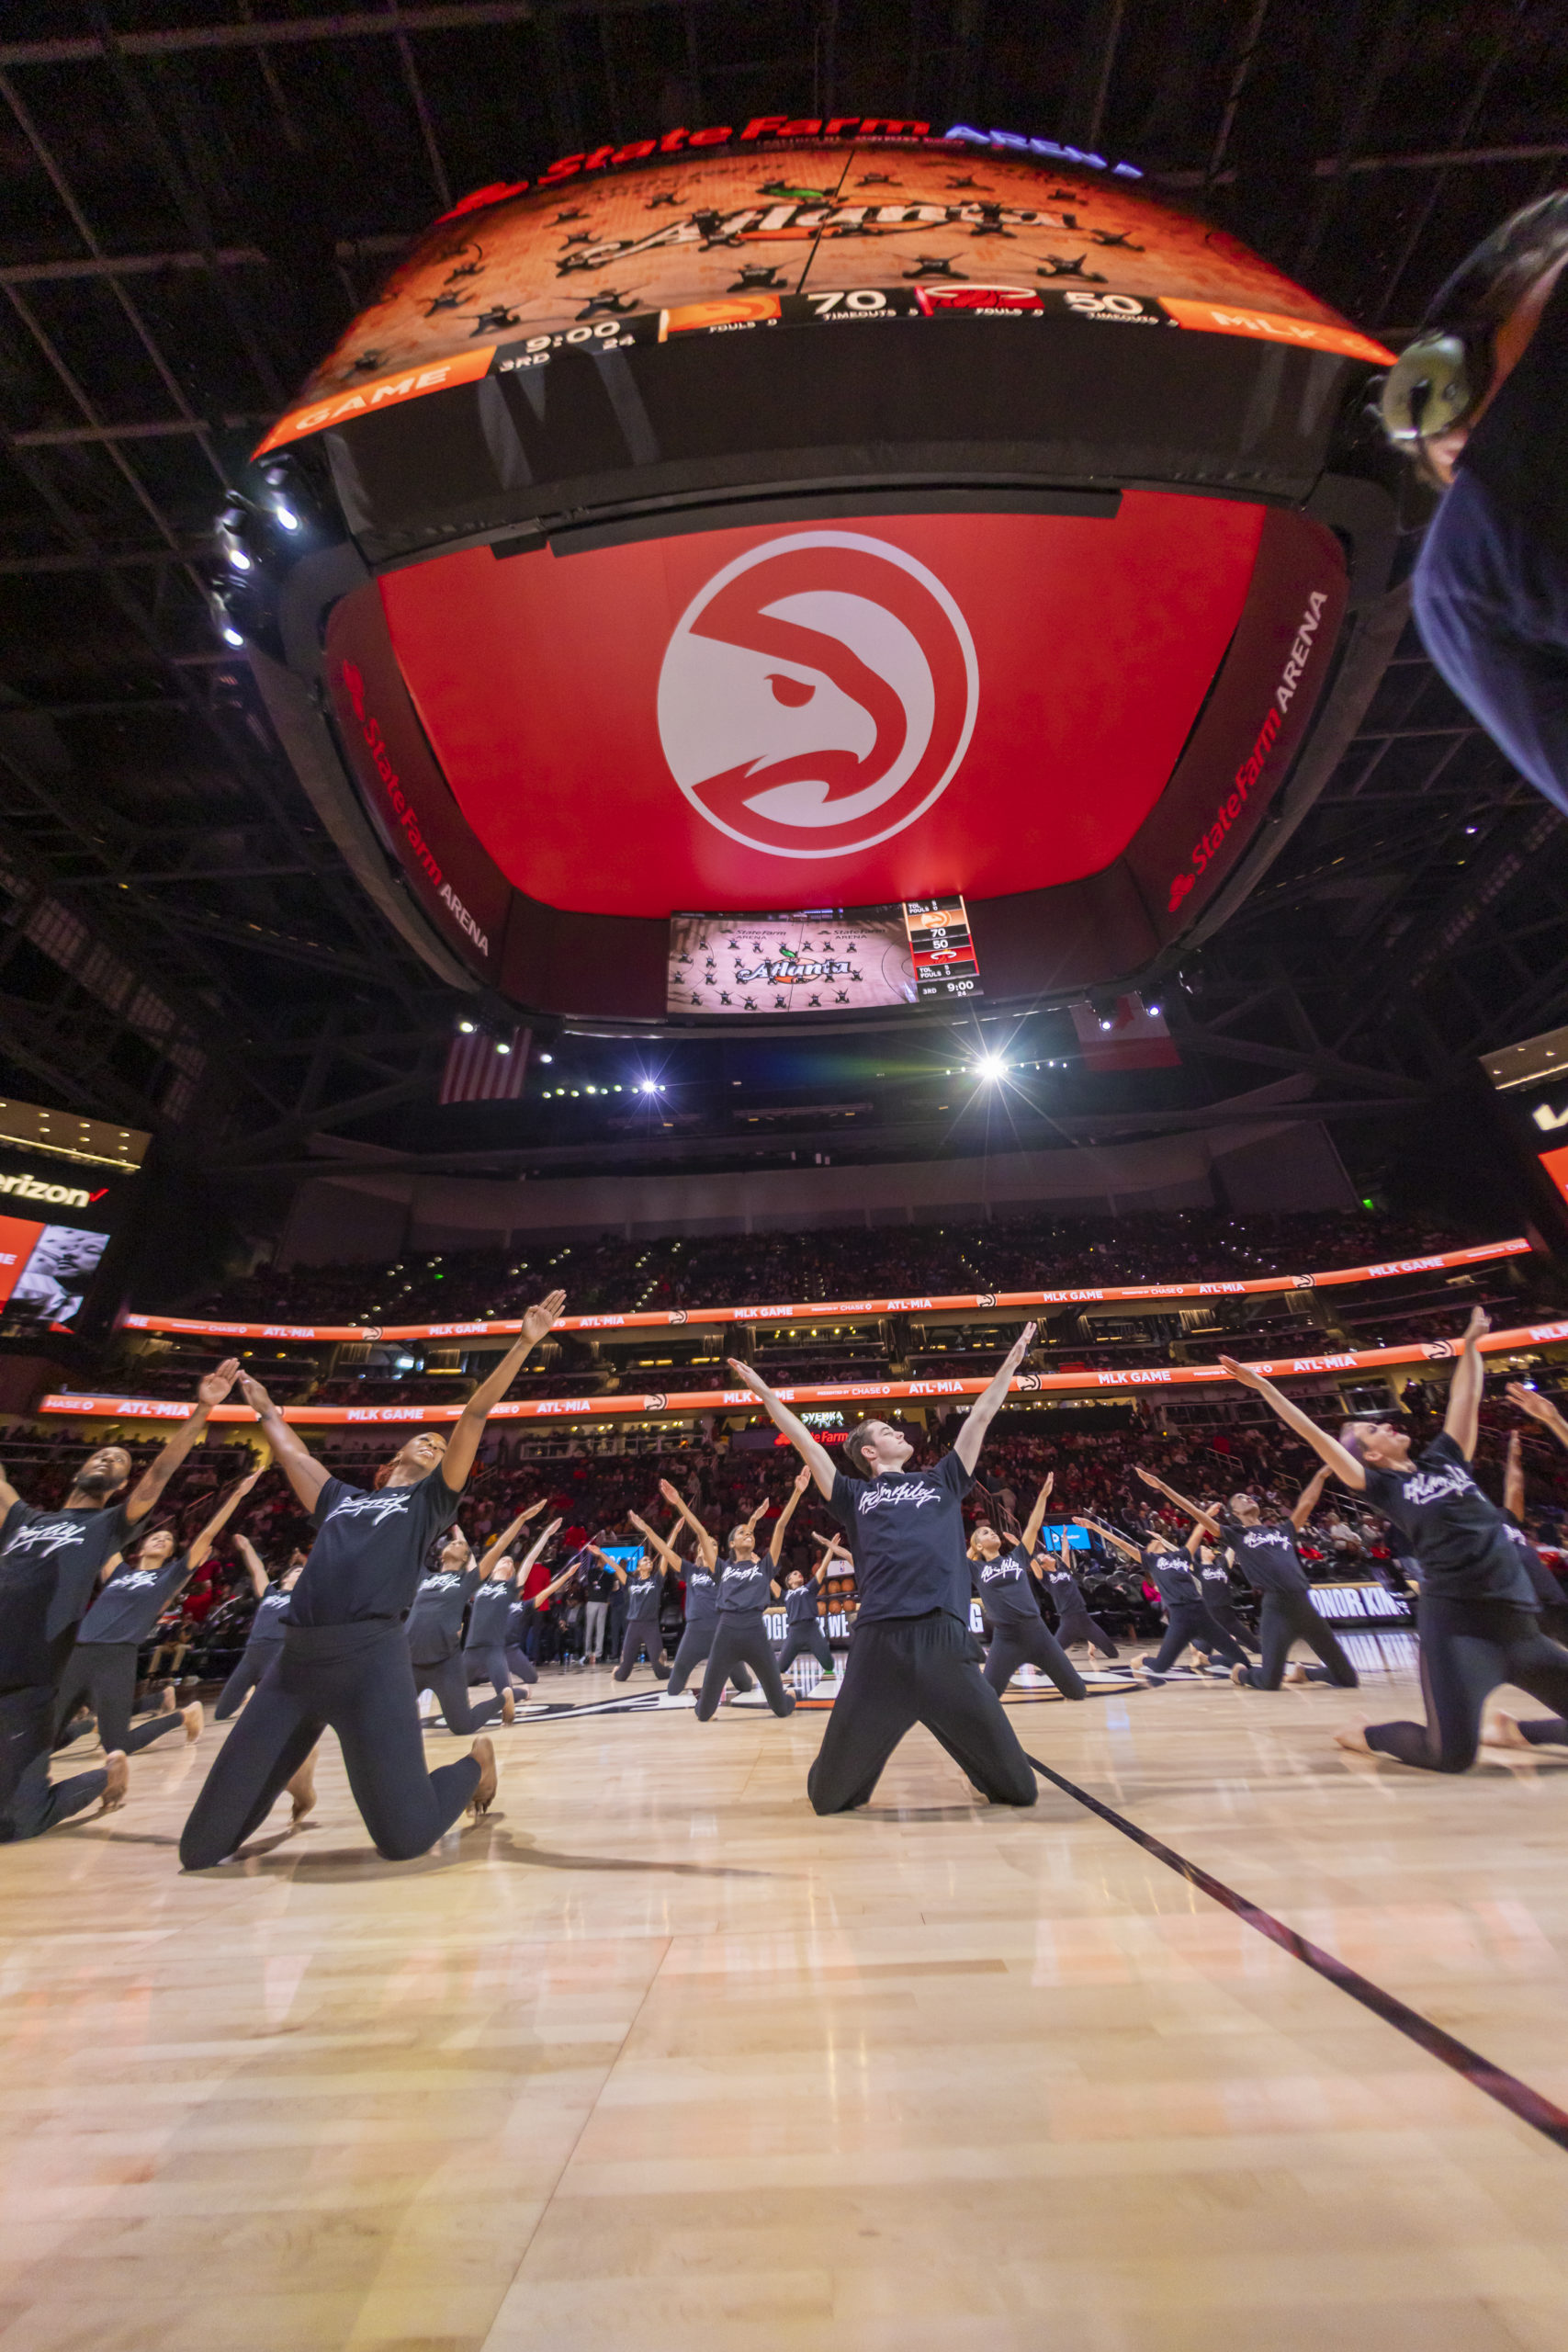 NBA All-Star 2021 to be held on March 7 in Atlanta, supporting HBCUs and  COVID-19 equity efforts